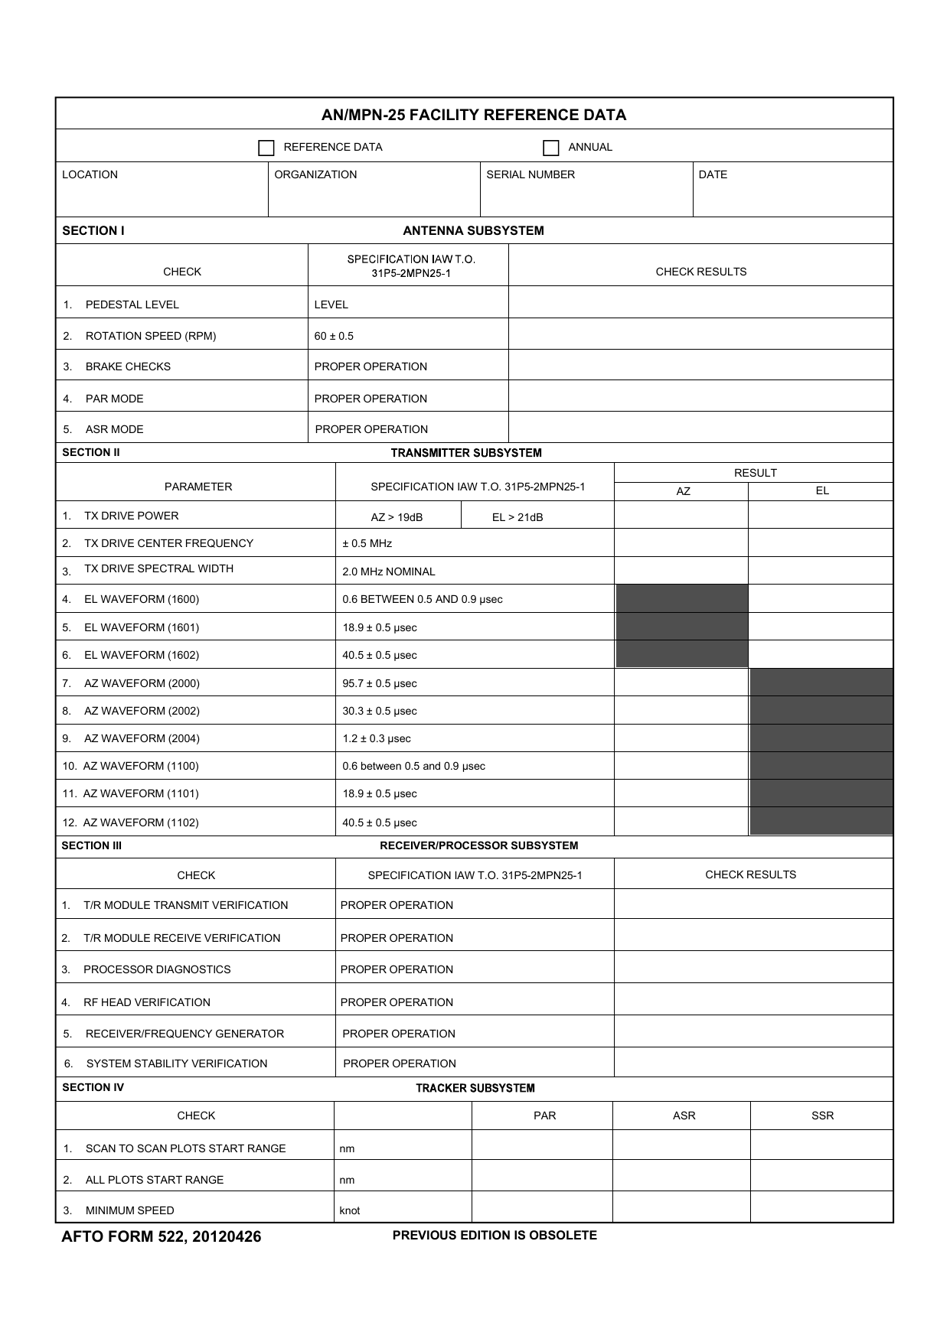 AFTO Form 522 An / Mpn-25 Facility Reference Data, Page 1